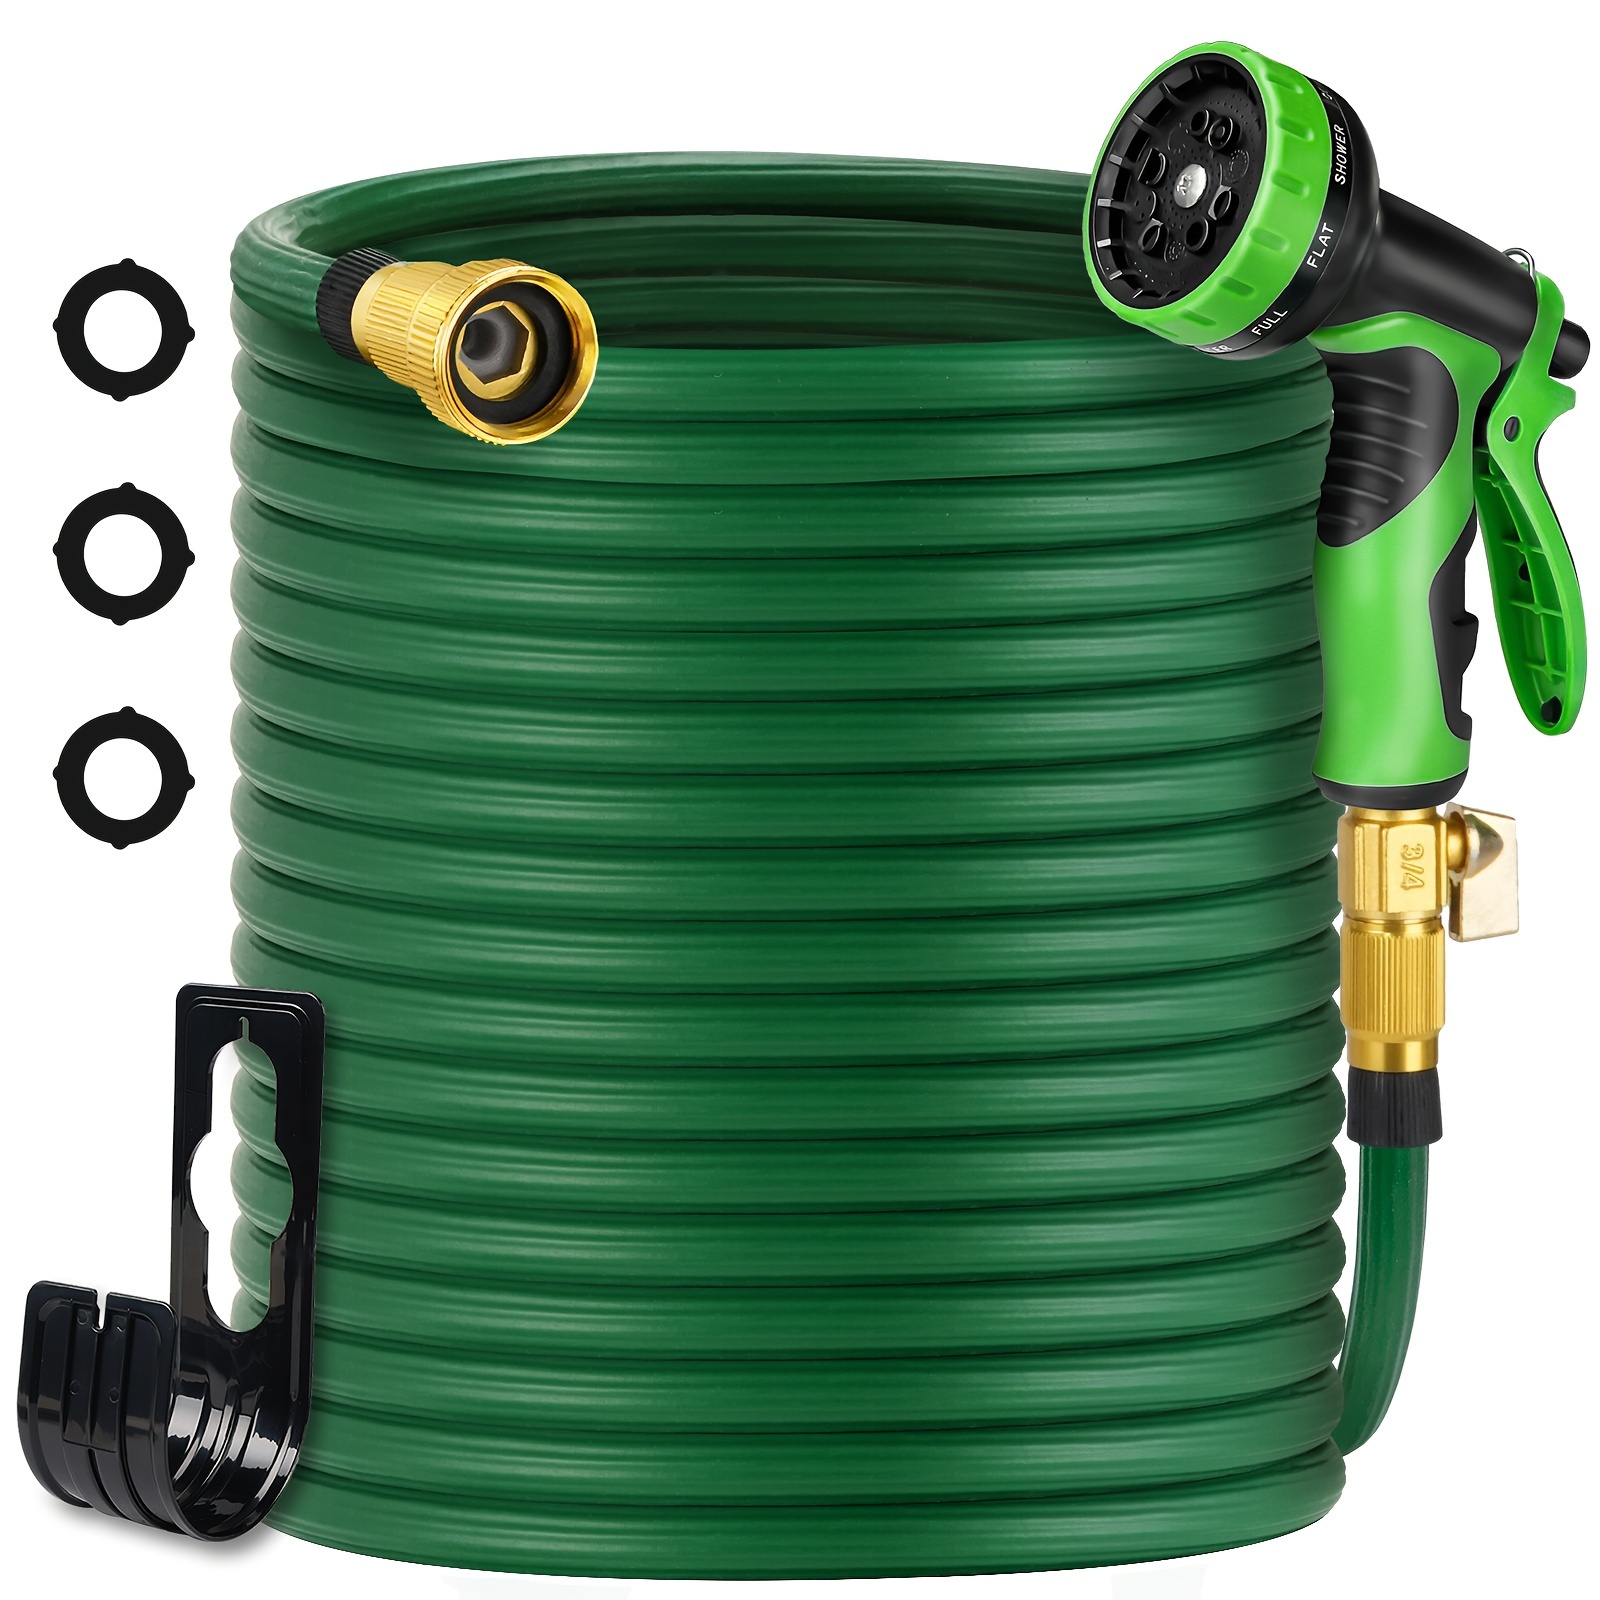 

Garden Hose 100ft Flexible Leakproof Water Hose With 10 Function Nozzle 3/4 Solid Brass Fitting Lightweight No Kink Pipe For Outdoor Lawn Yard